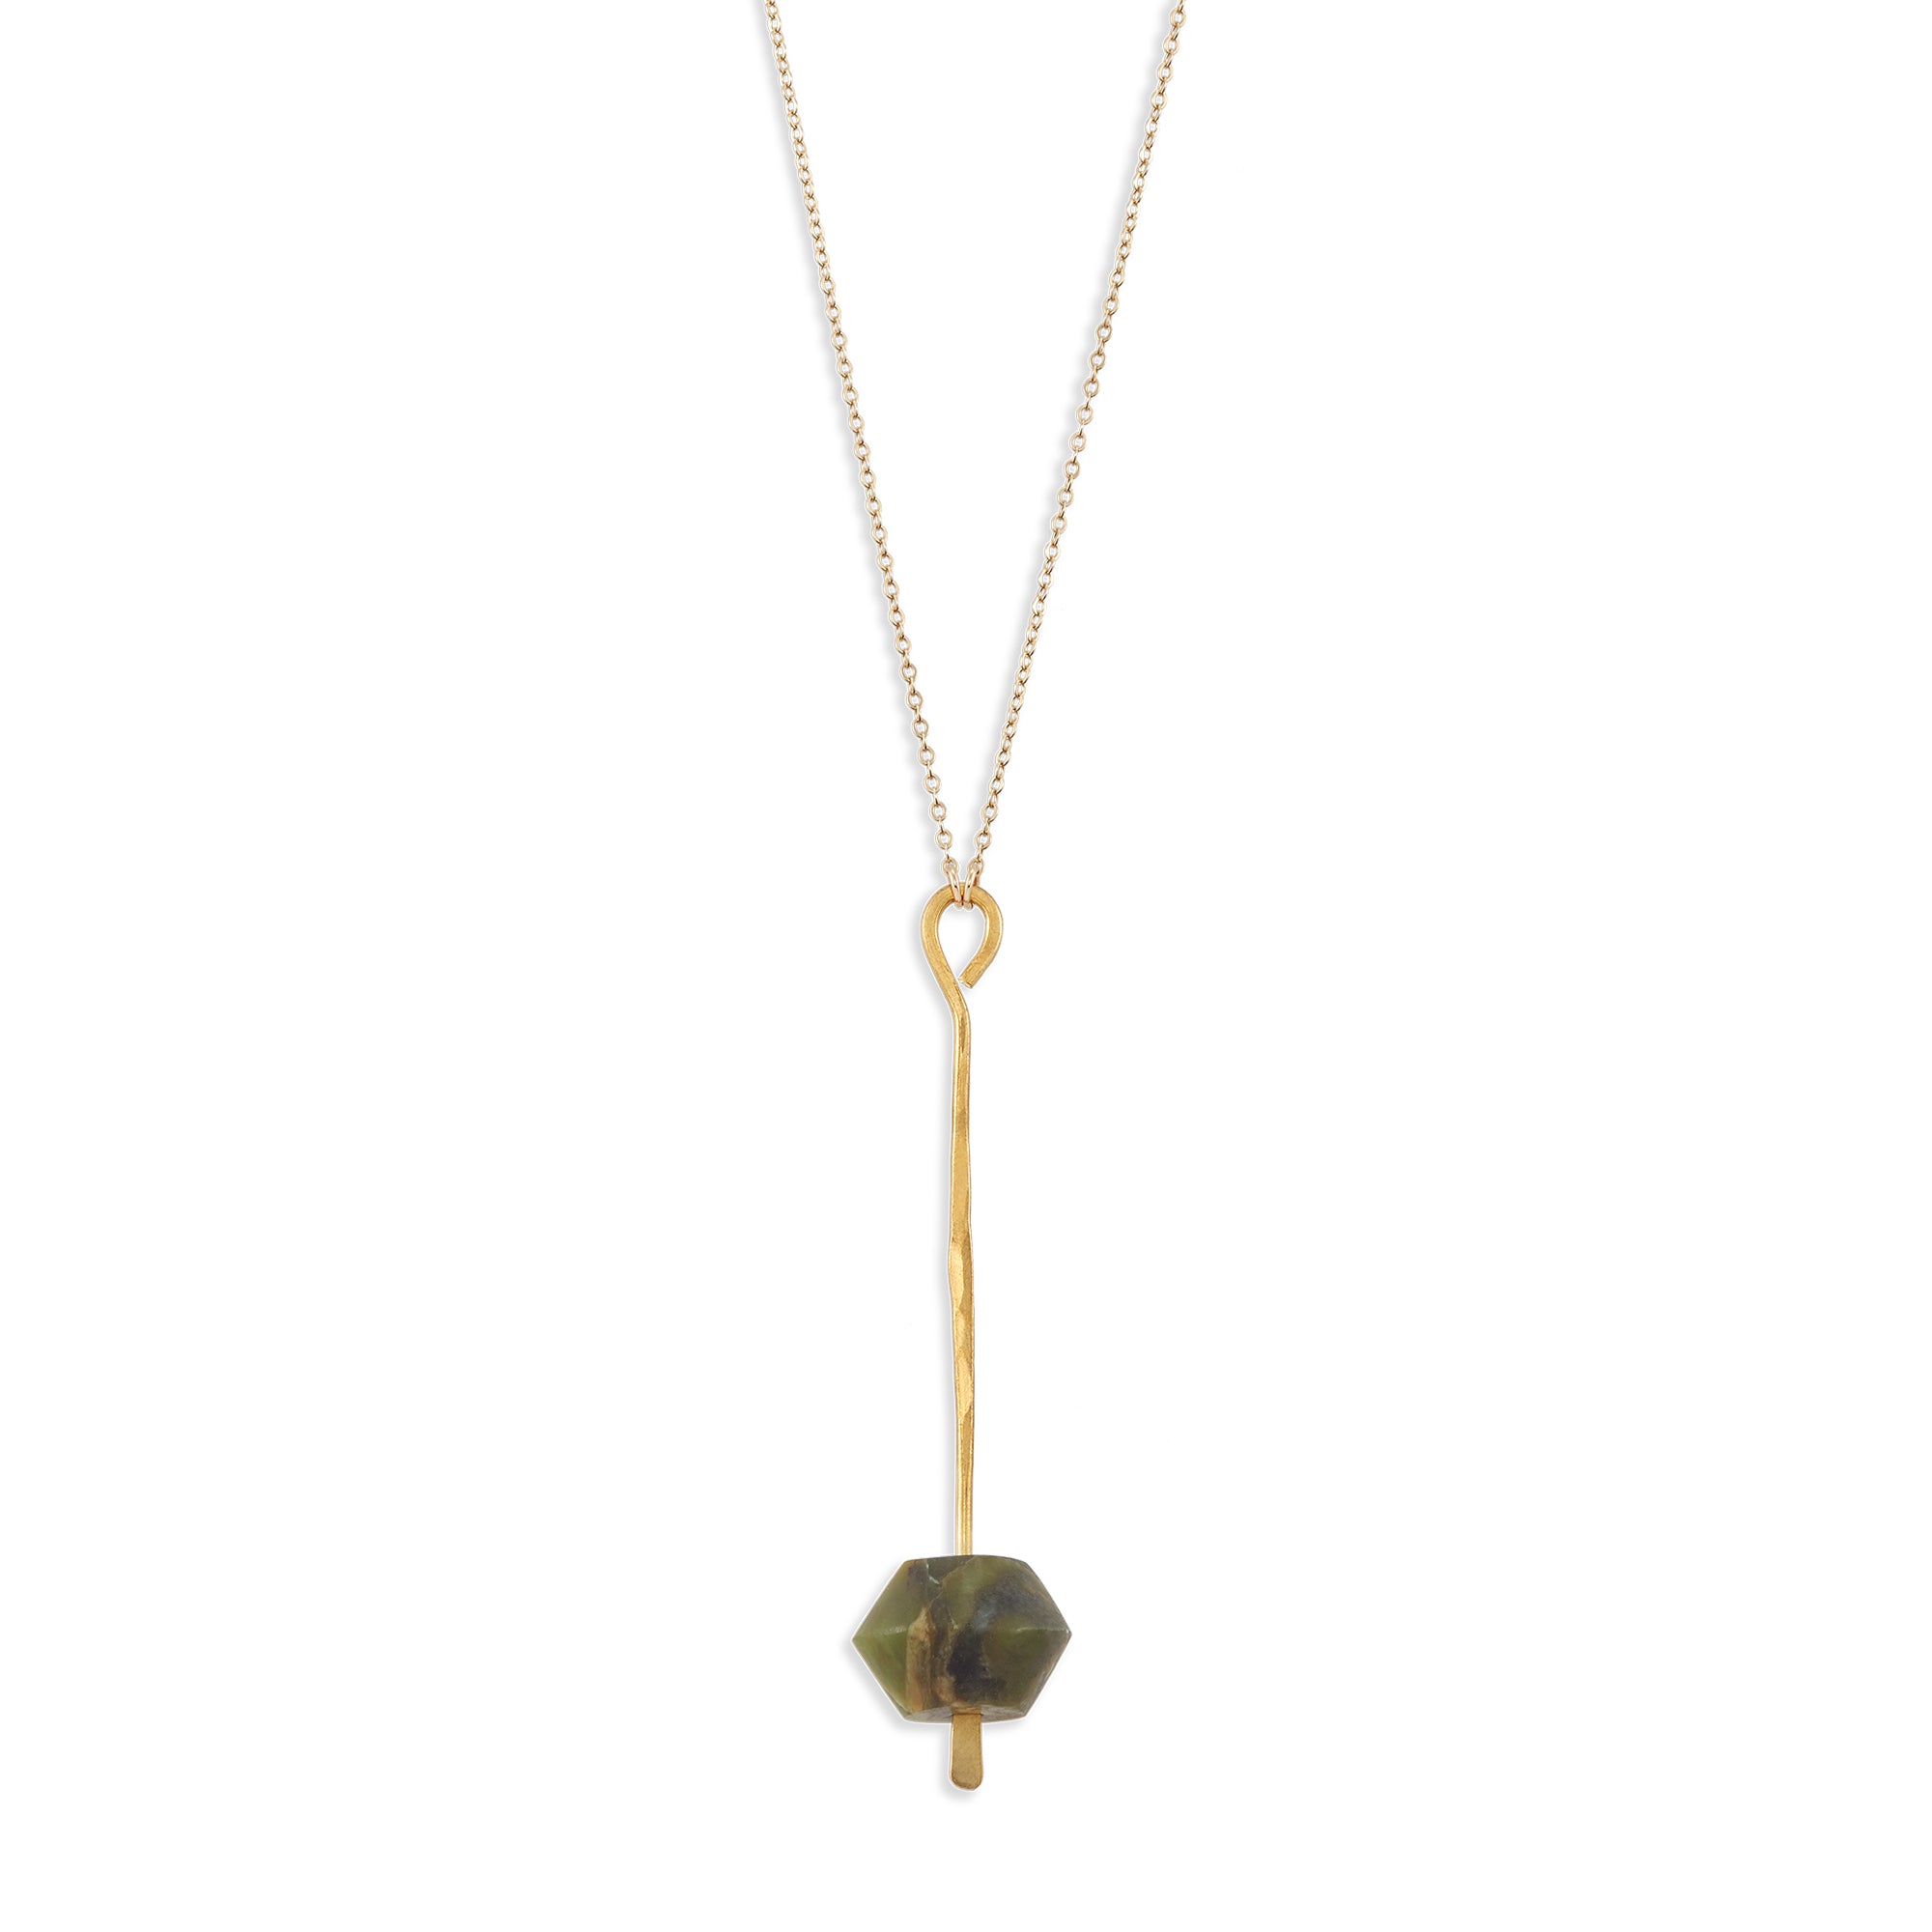 The Raze Necklace features a semi-precious beveled onyx bead suspended from a hammered bar on a long layering necklace.   